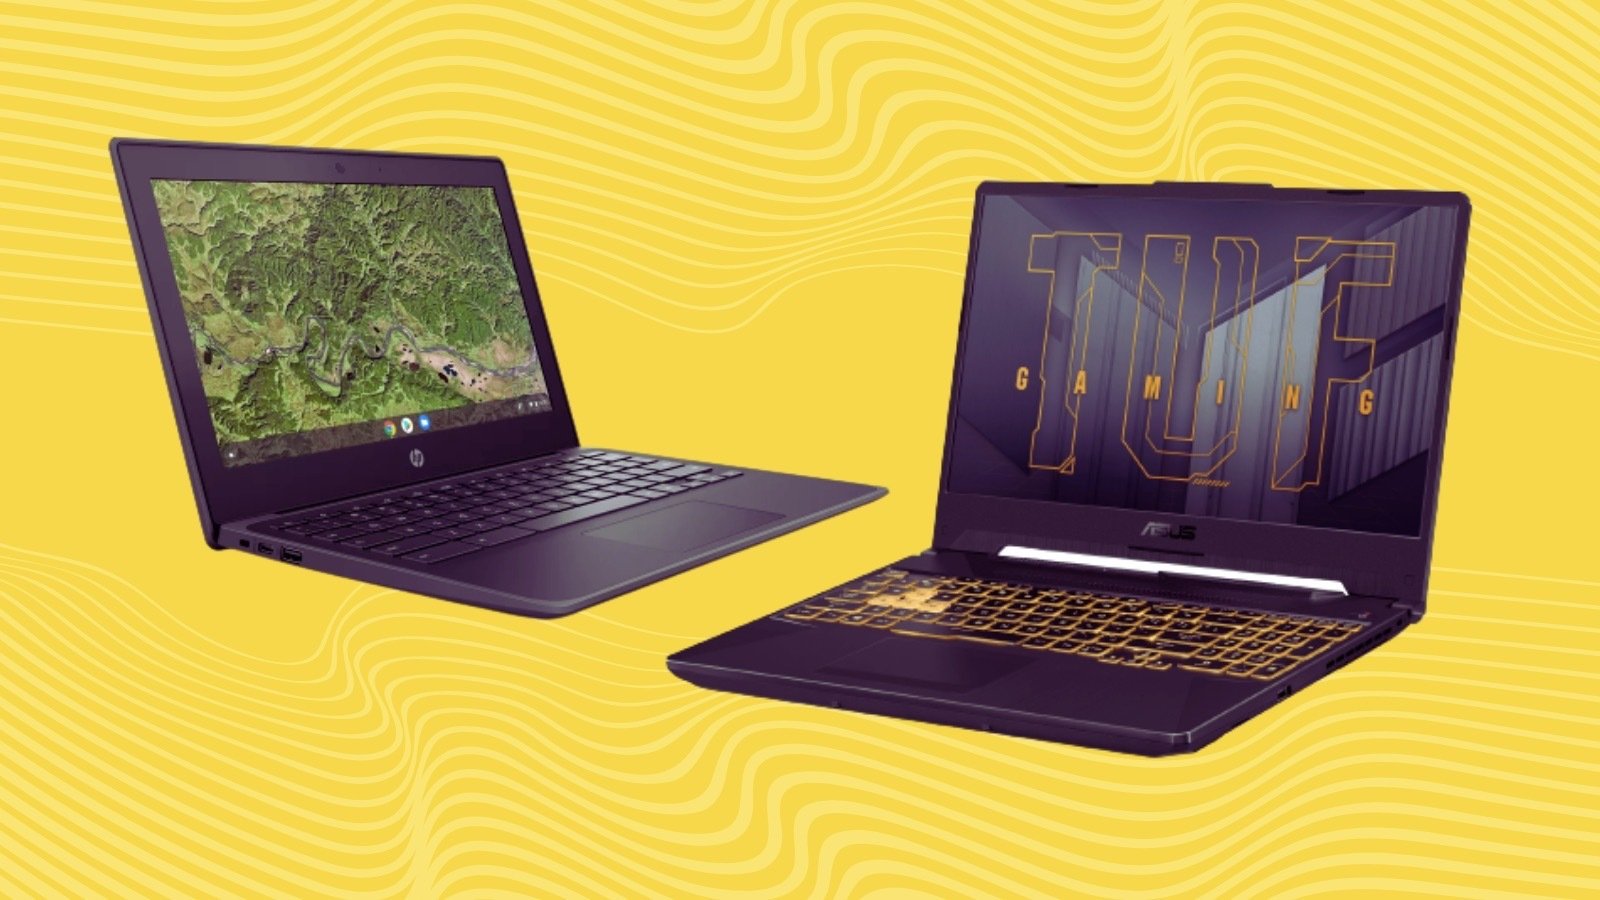 An hp chromebook and an asus tuf gaming laptop against a yellow background.